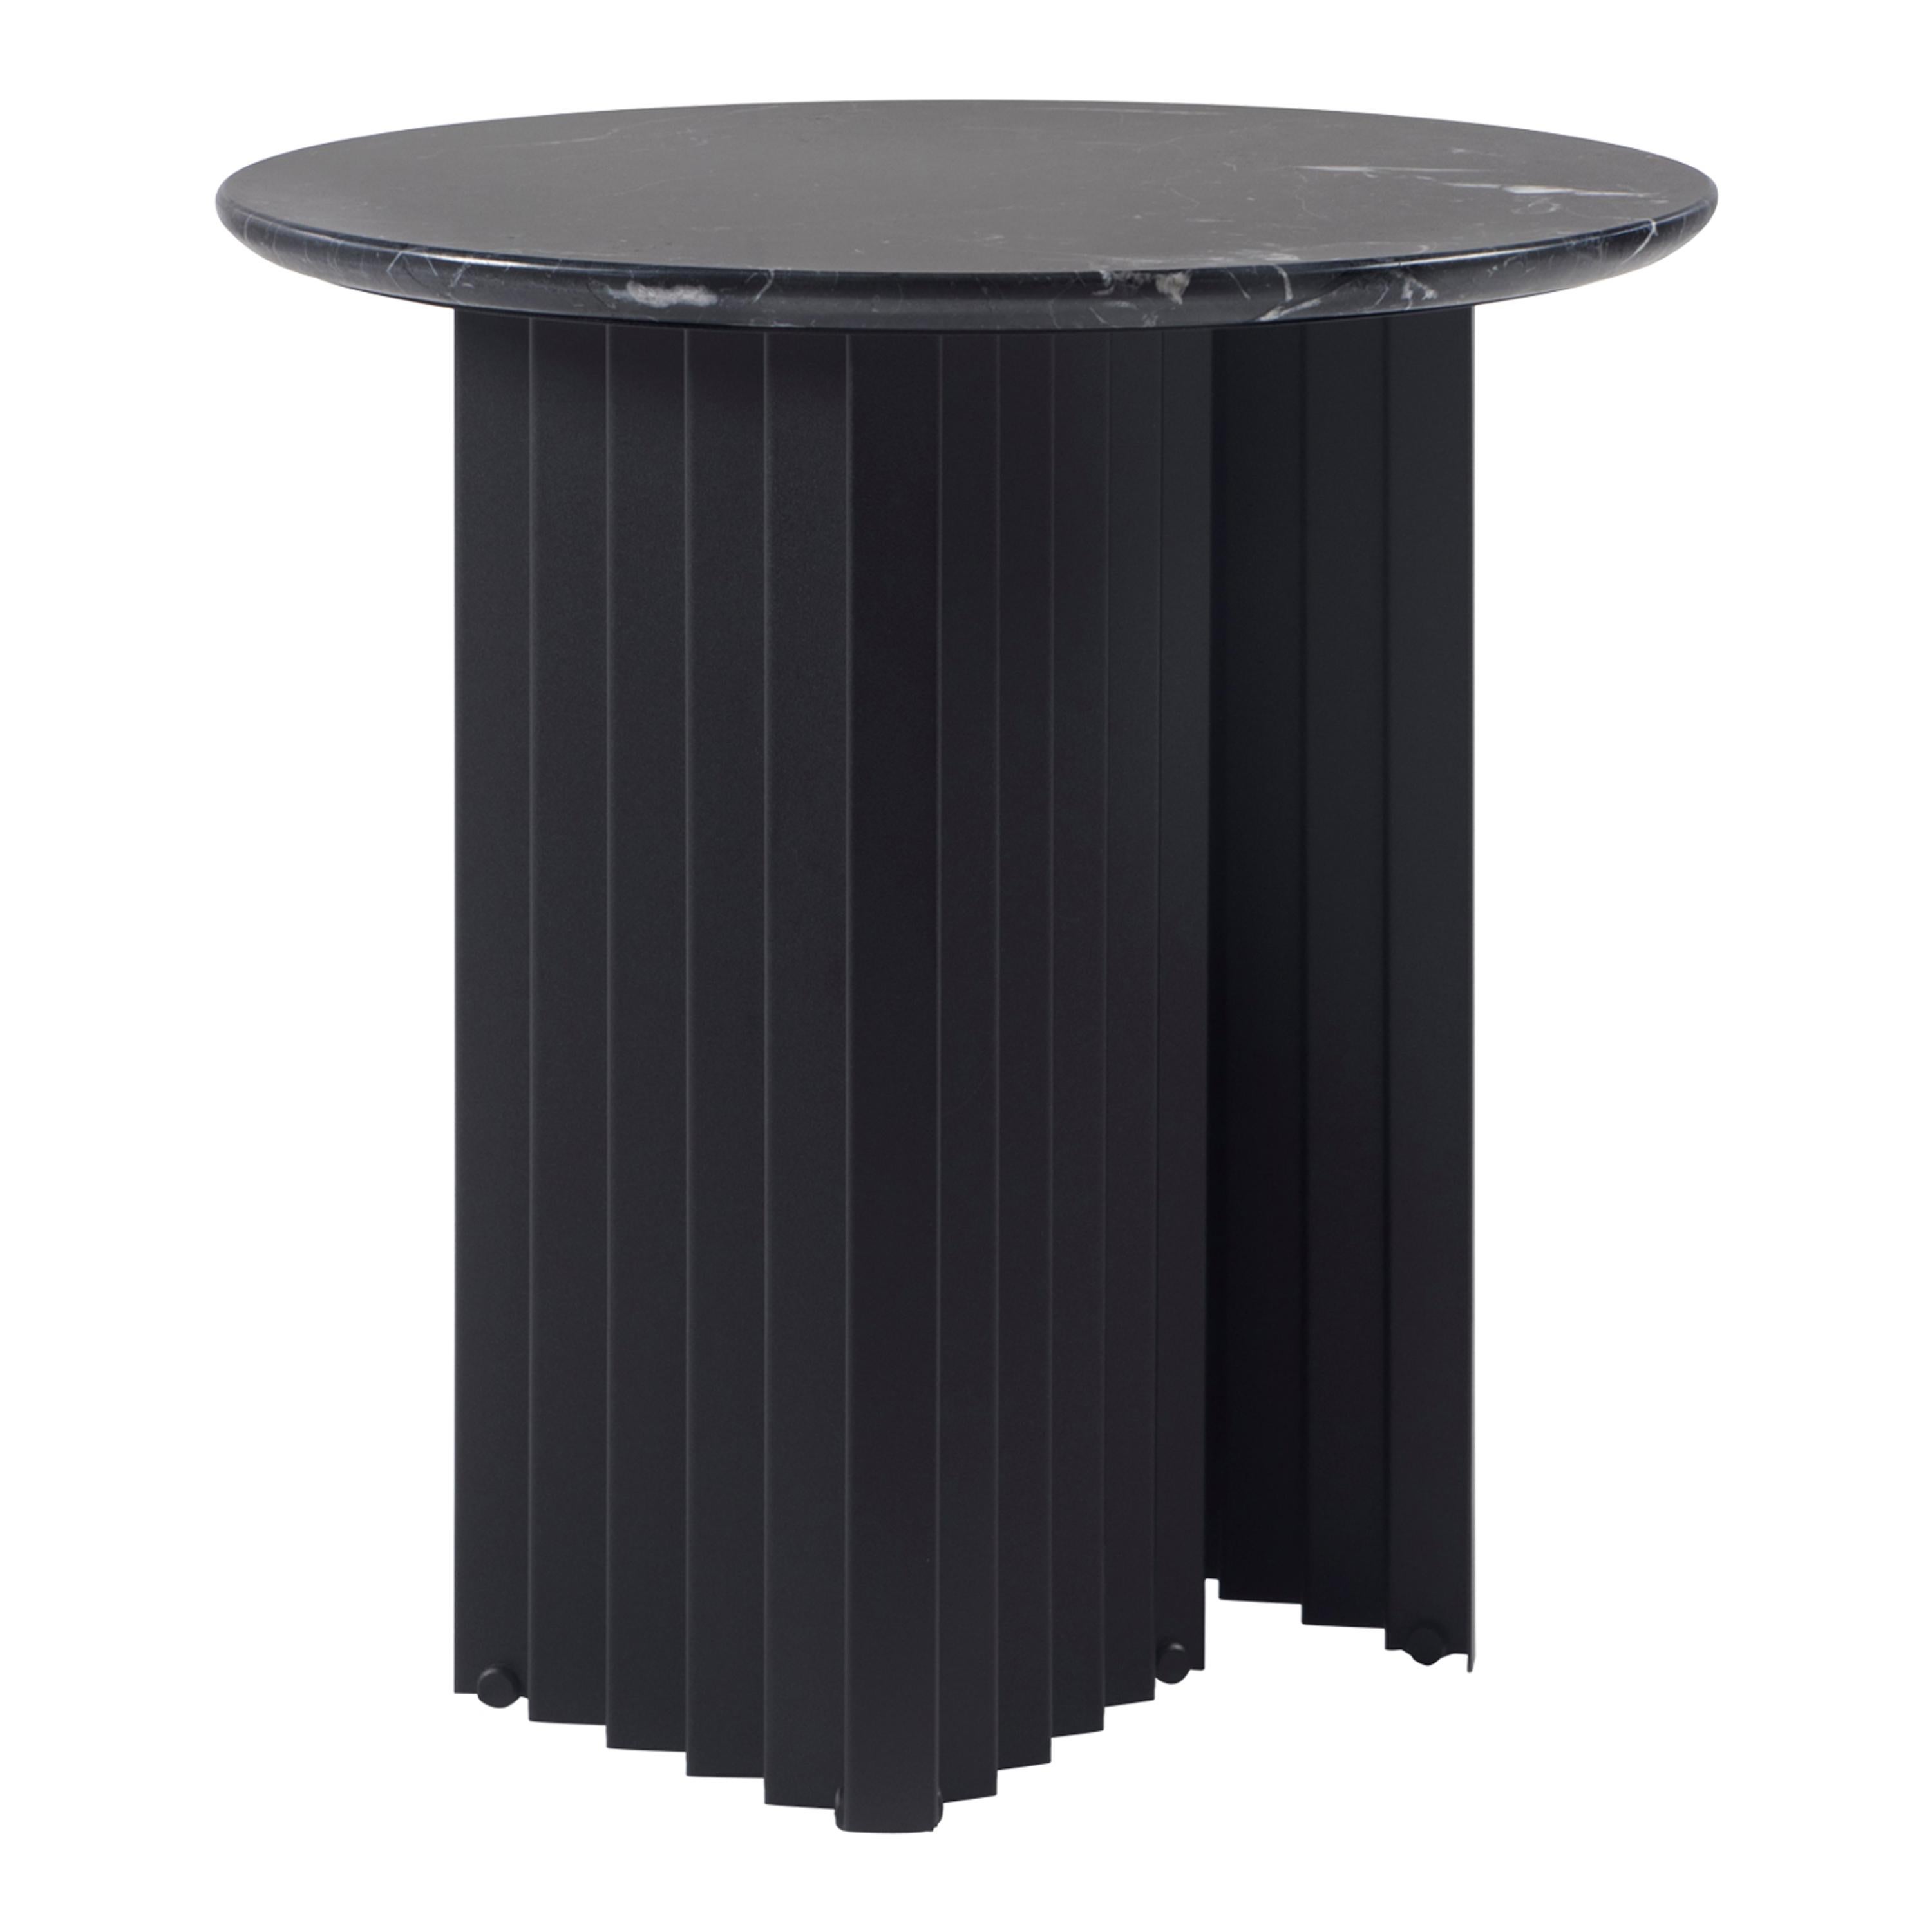 RS Barcelona Plec Round Small Table in Black Marble by A.P.O.